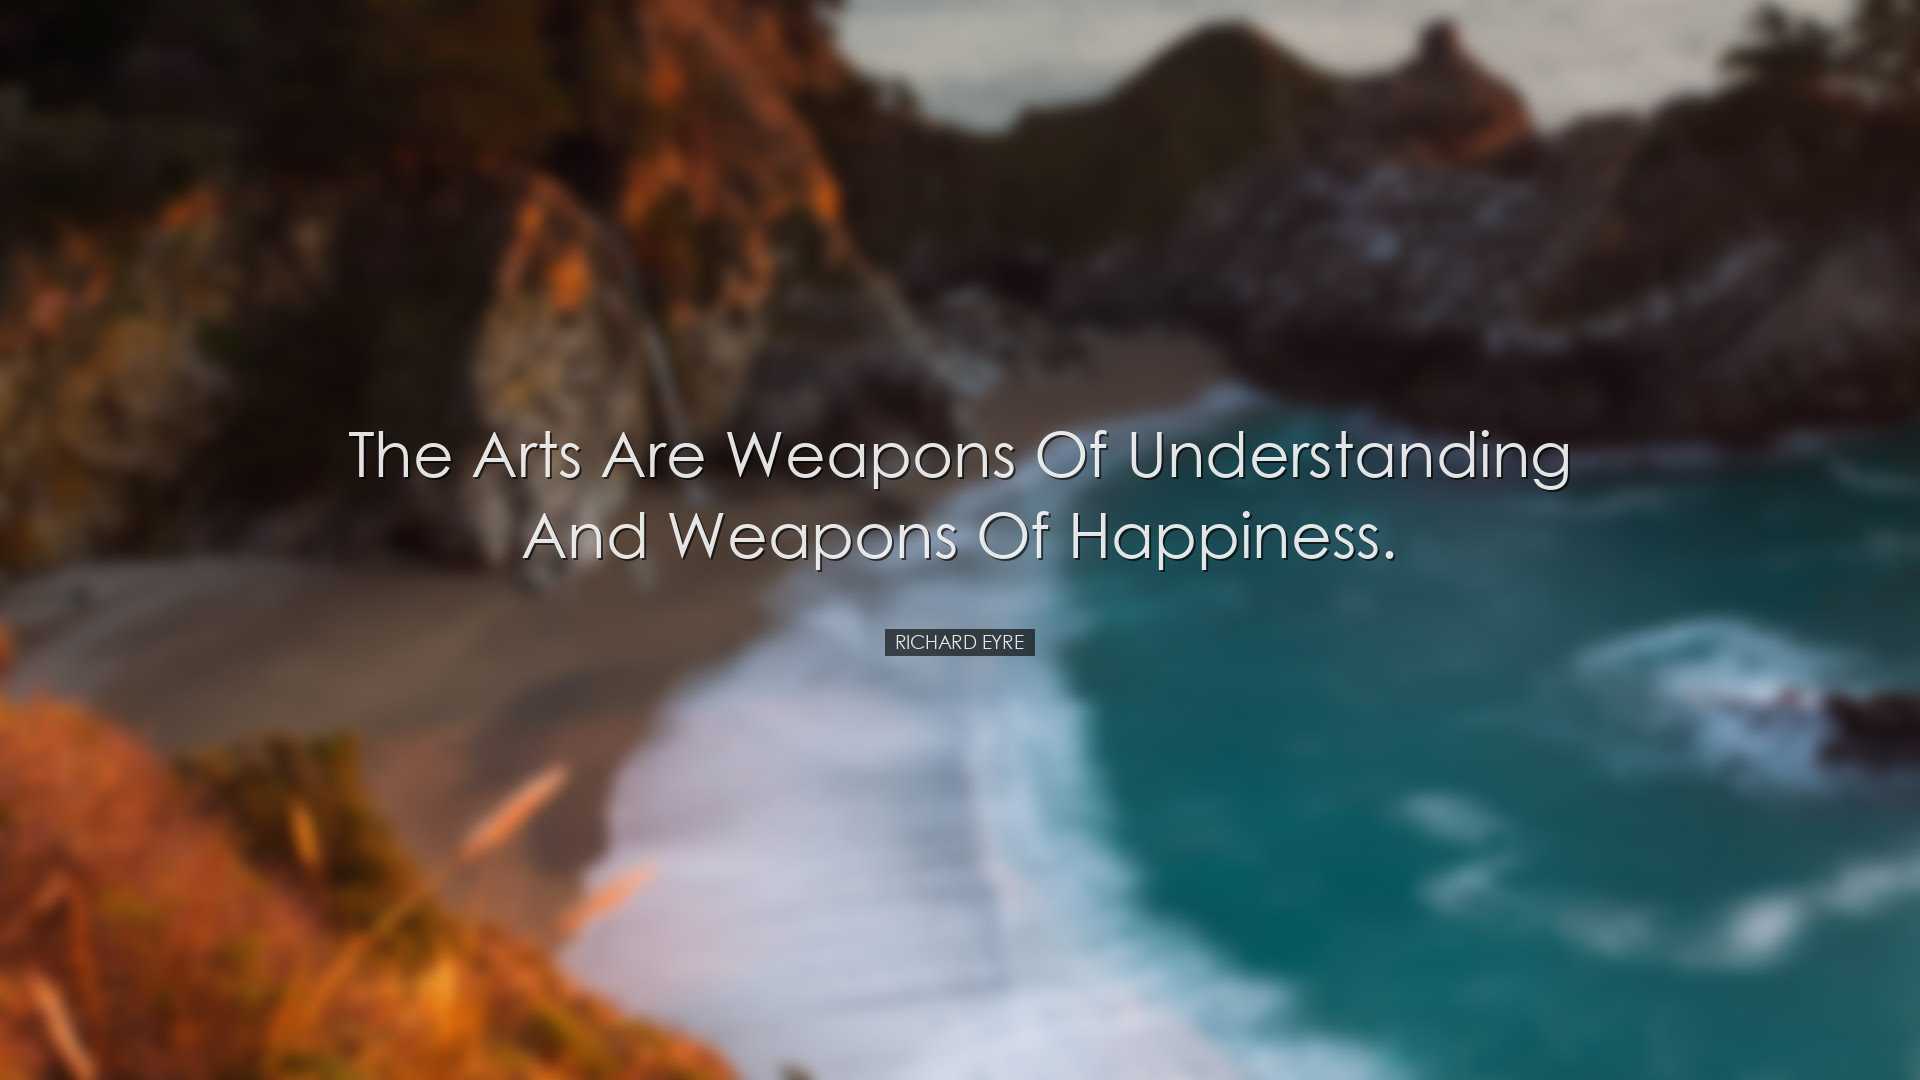 The arts are weapons of understanding and weapons of happiness. -